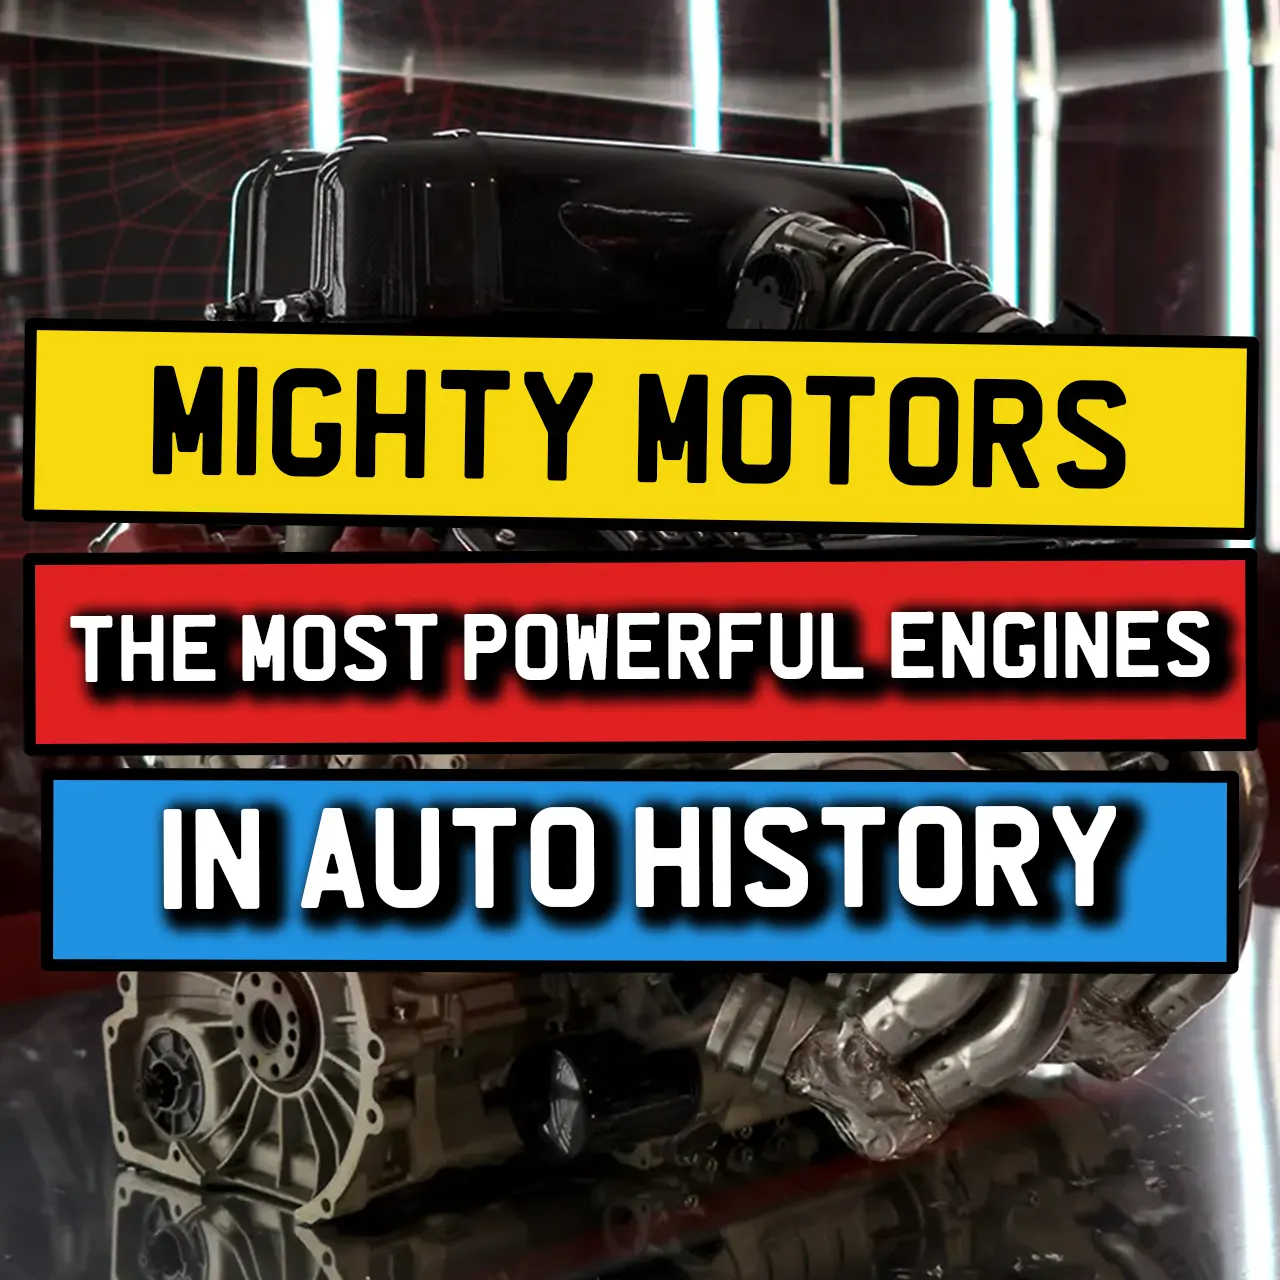 Mighty Motors – The Most Powerful Engines in Auto History